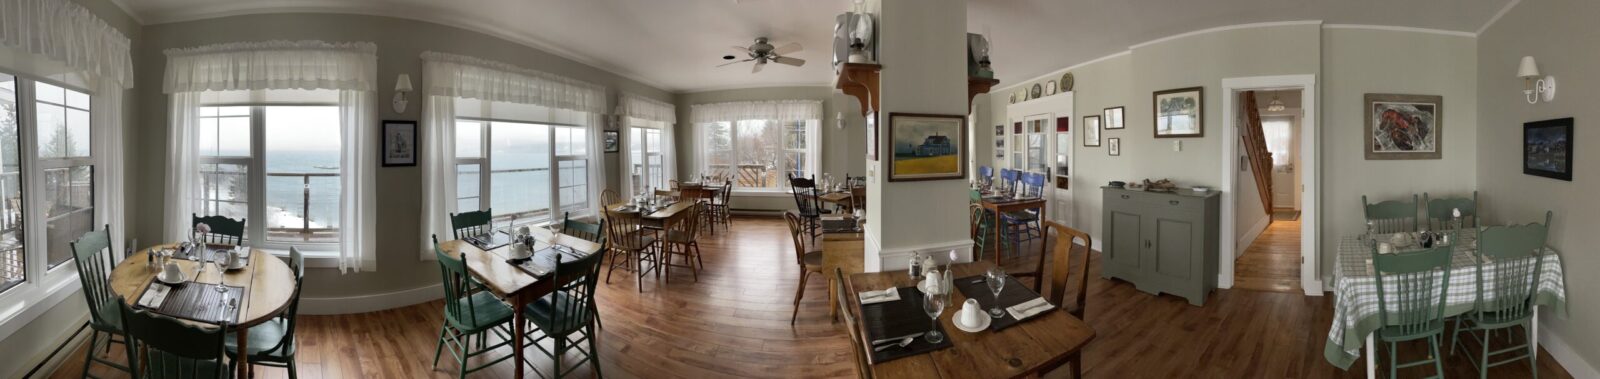 A 360 degree view of a dining room with a view of the ocean.